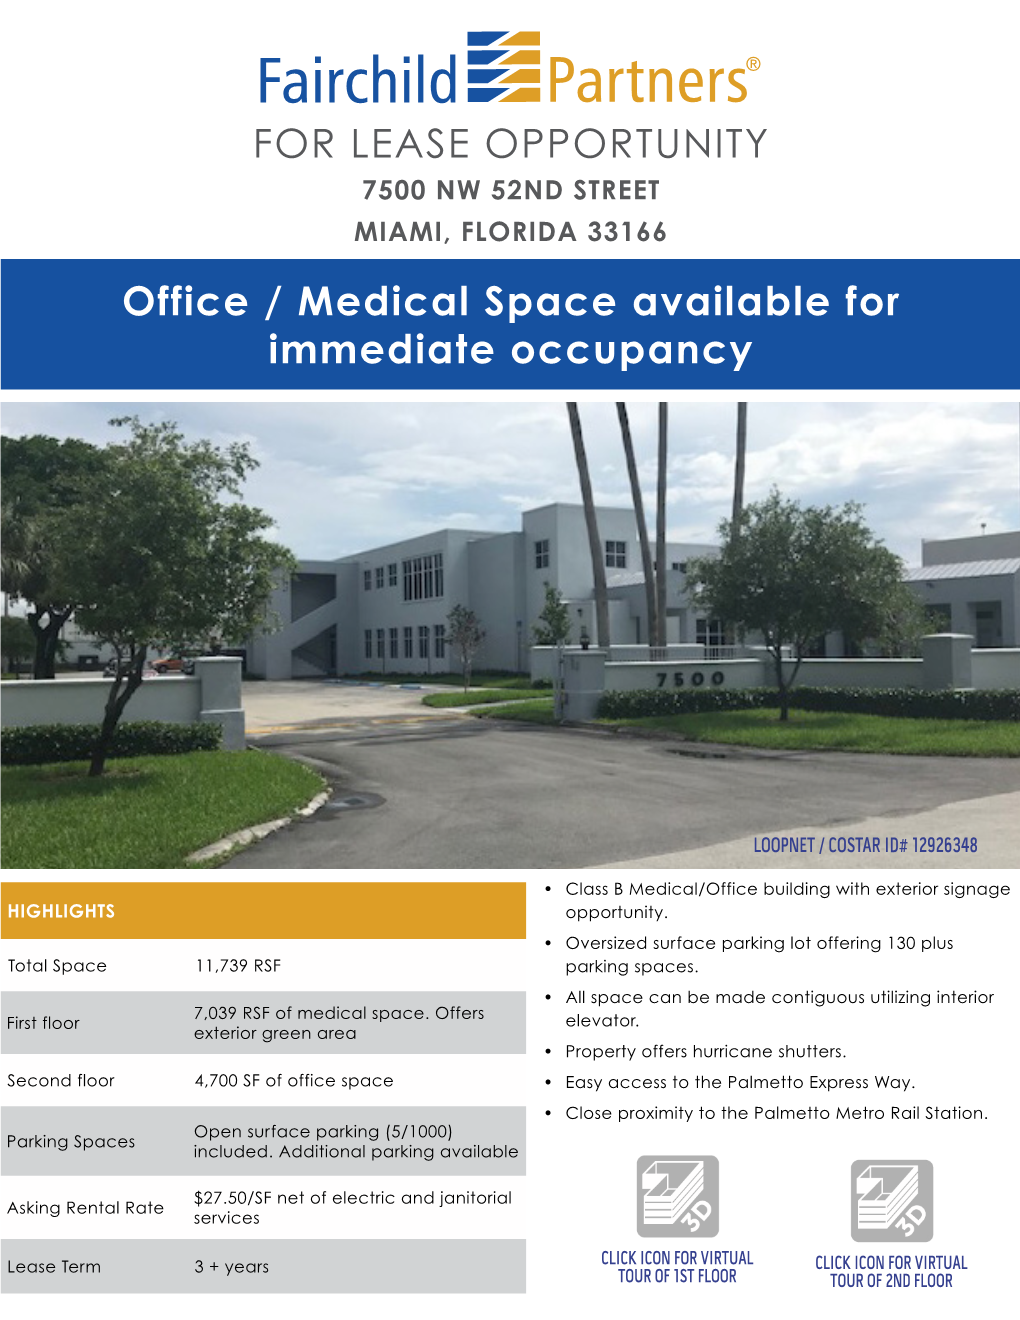 FOR LEASE OPPORTUNITY Office / Medical Space Available for Immediate Occupancy